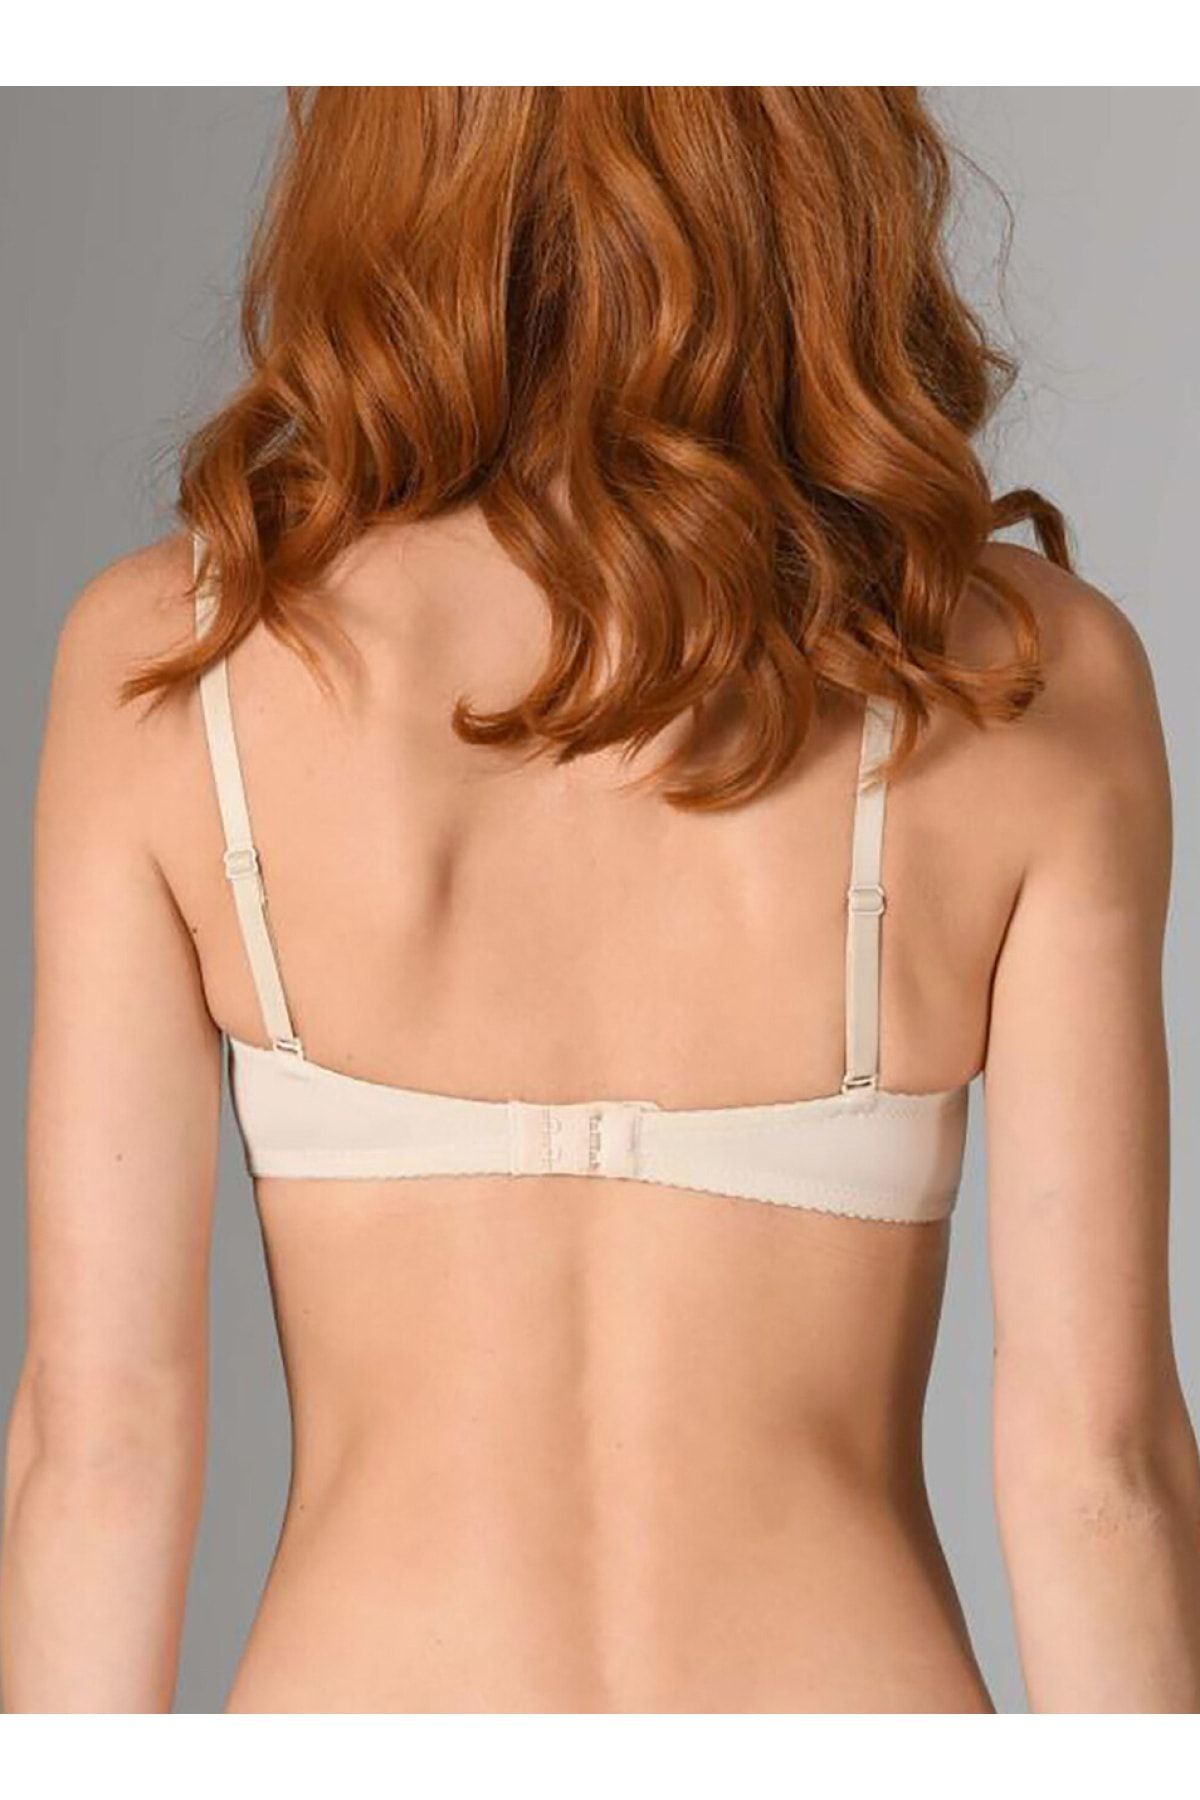 Lorelm Transparent Back Low-cut Strapless Bra Supported Push Up